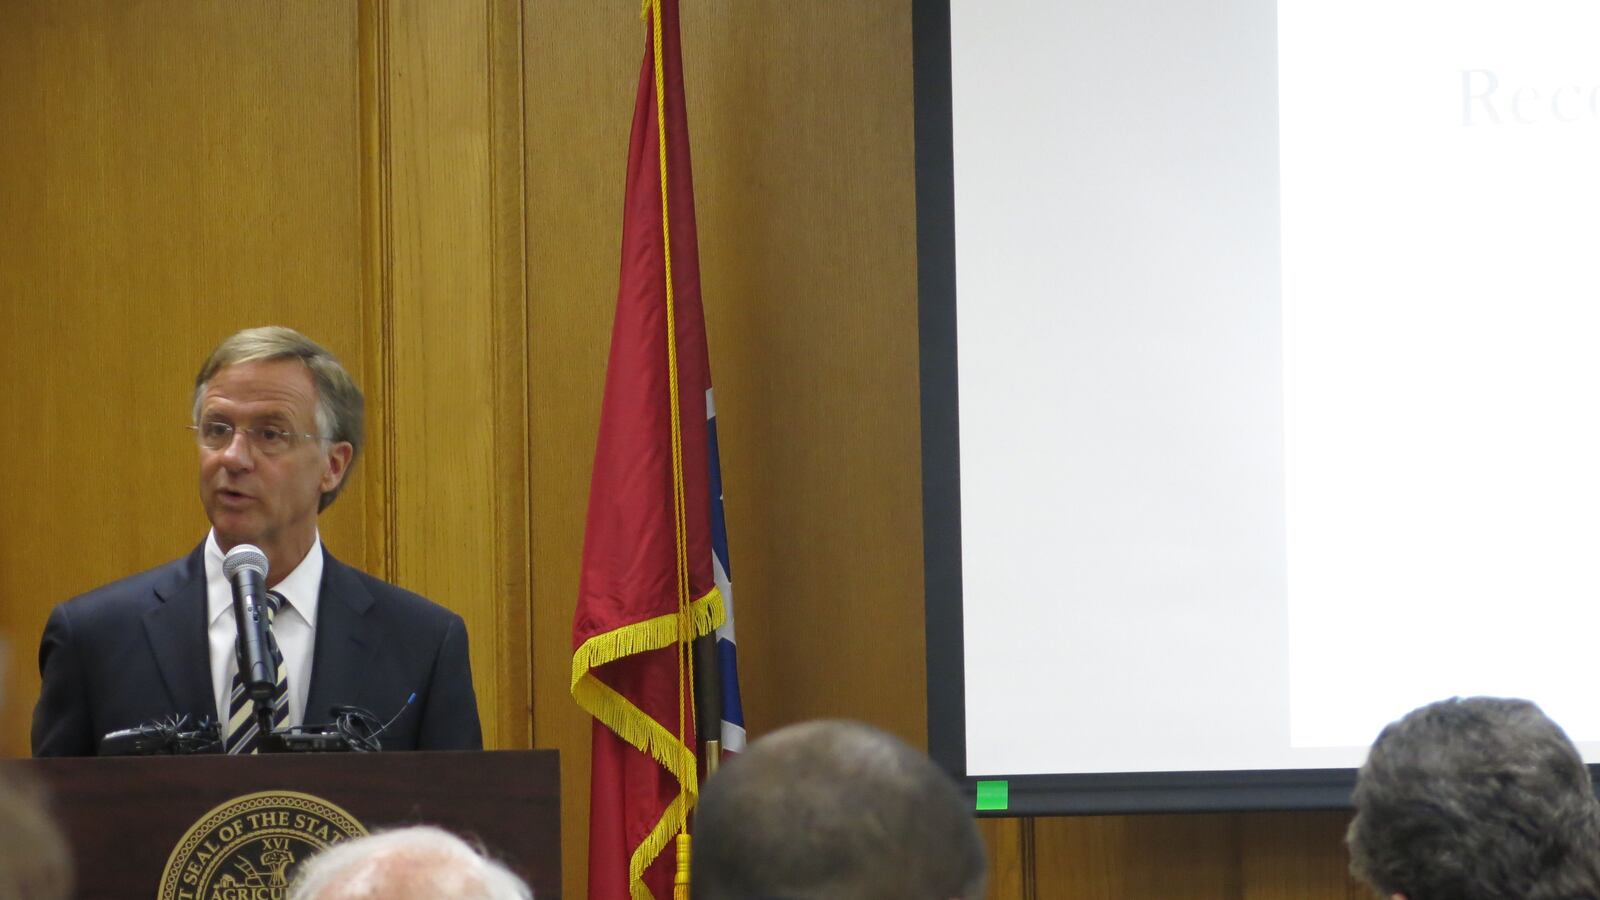 Gov. Bill Haslam addressed news organizations on Monday in advance of his evening State of the State address.